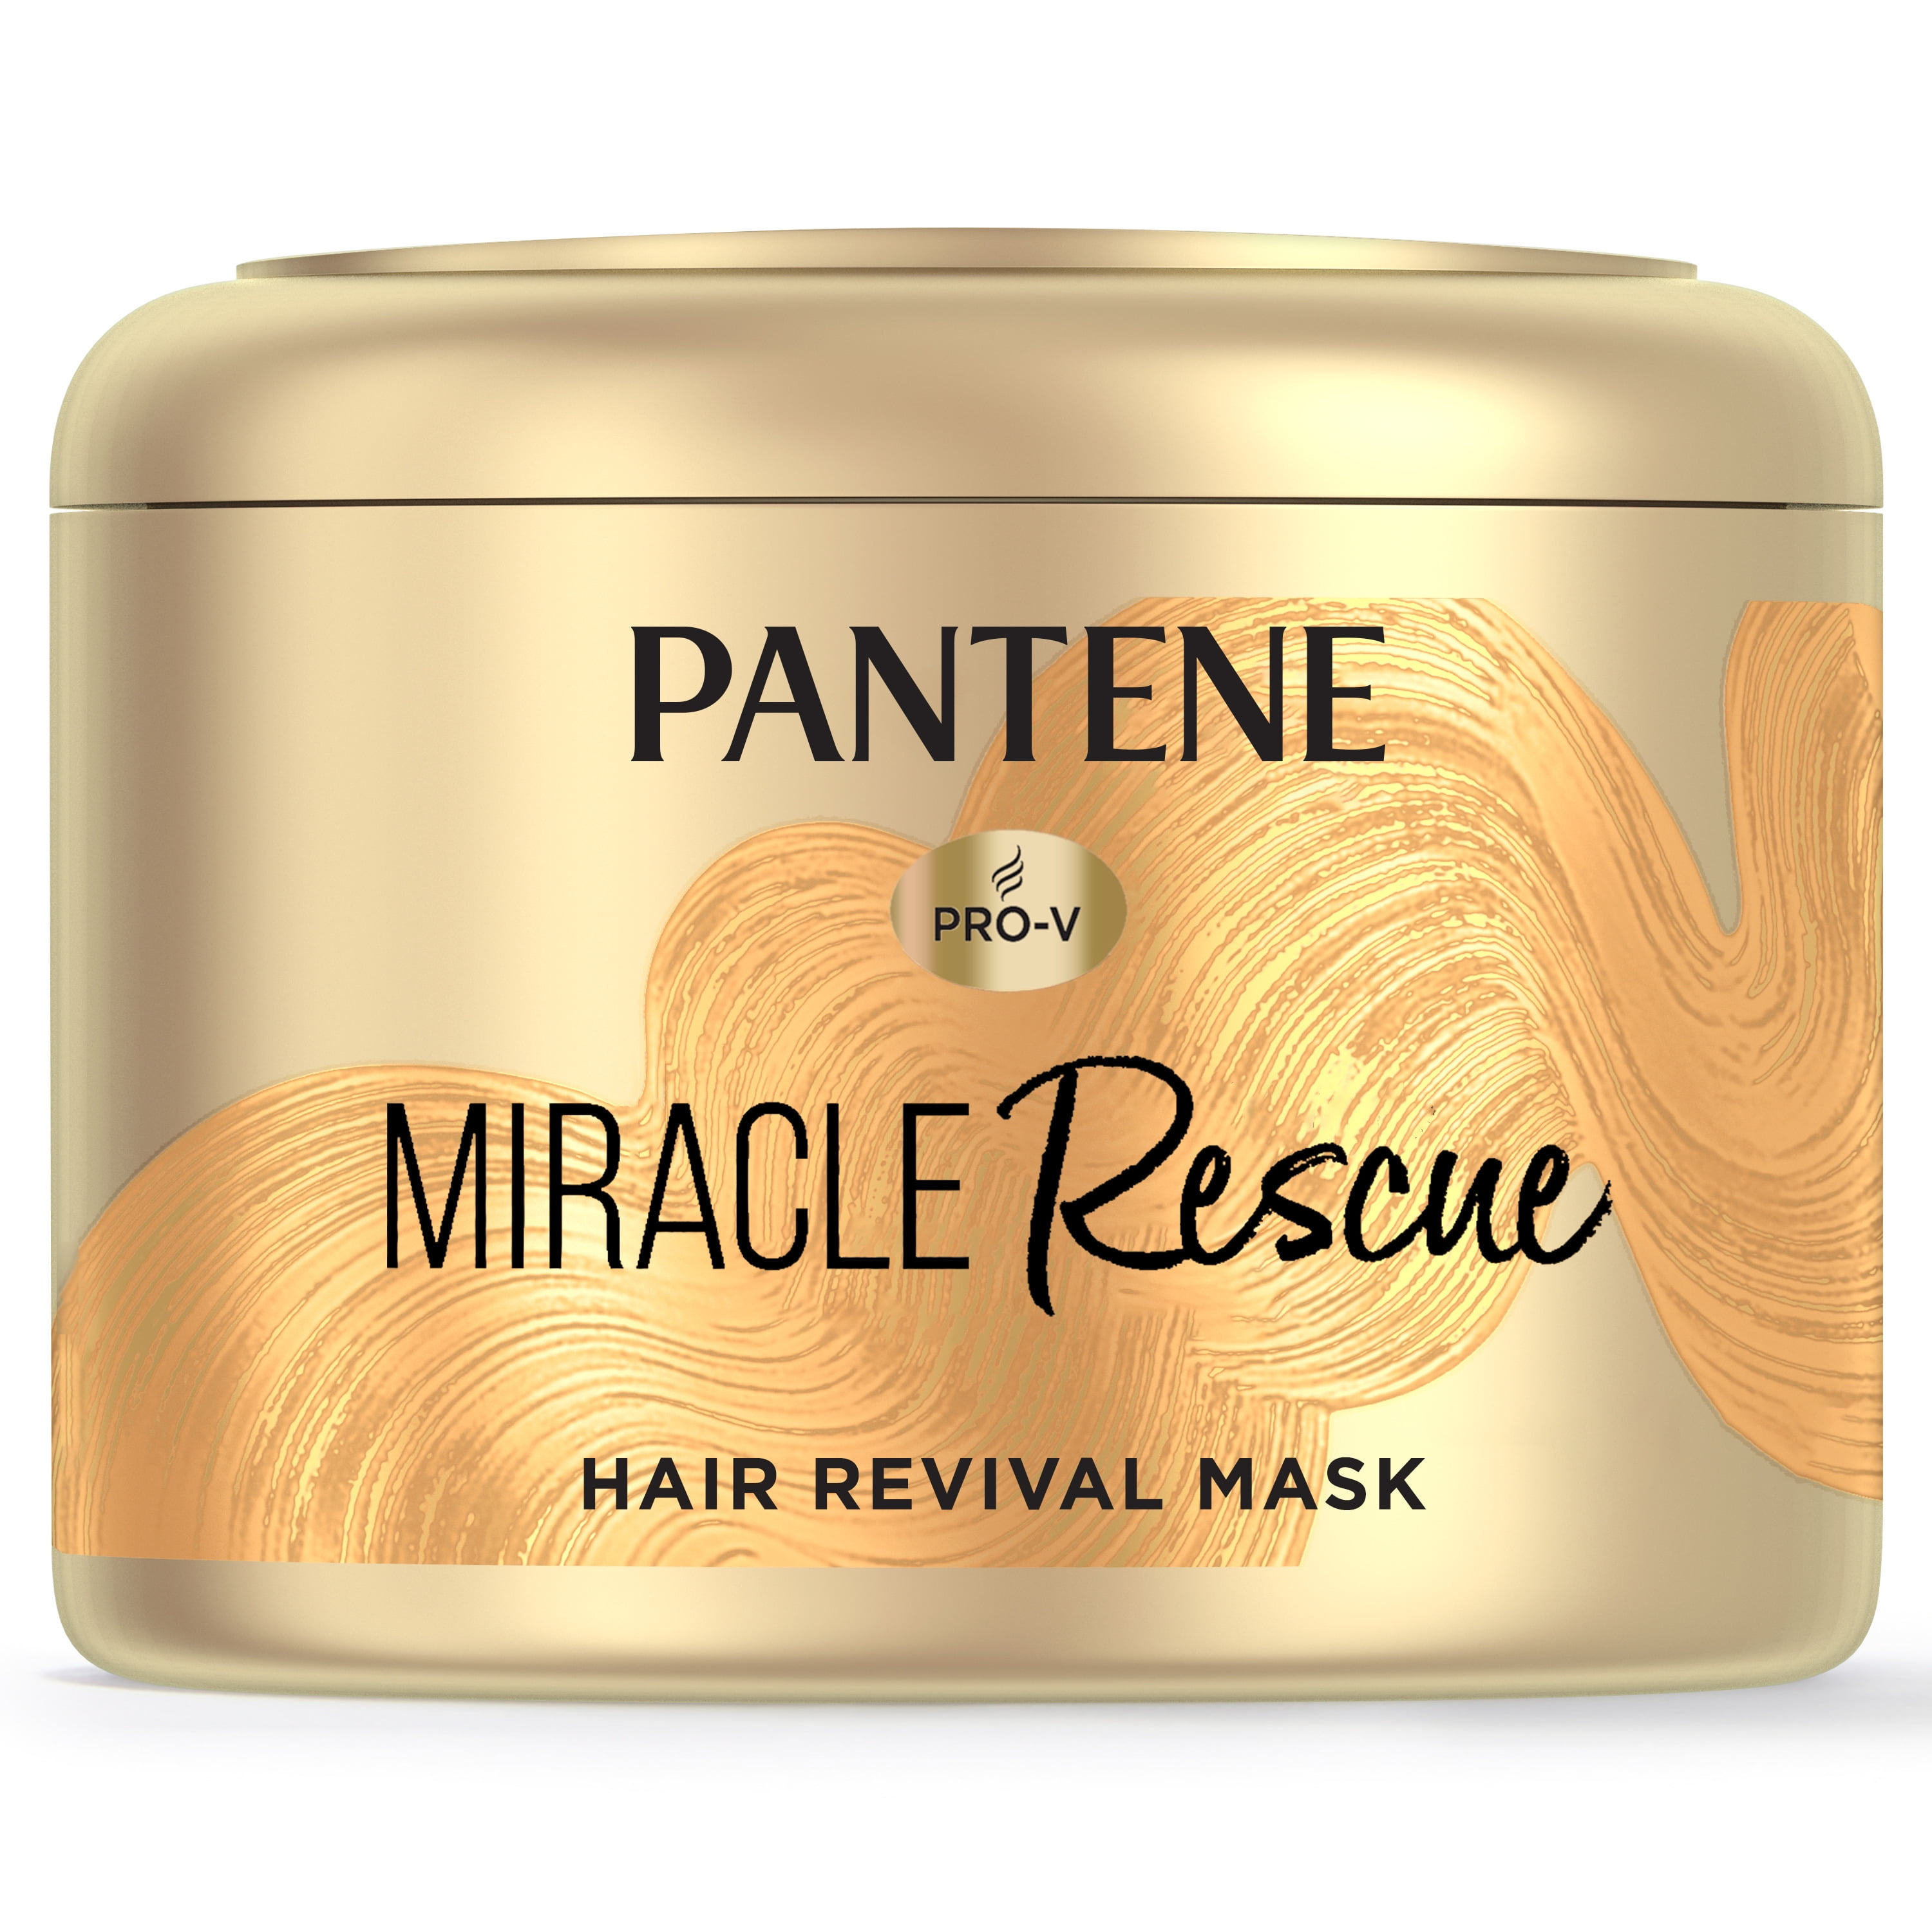 Pantene Hair Mask, Deep Conditioning Hair Mask for Dry Damaged Hair, Miracle Rescue, 6.4 oz -